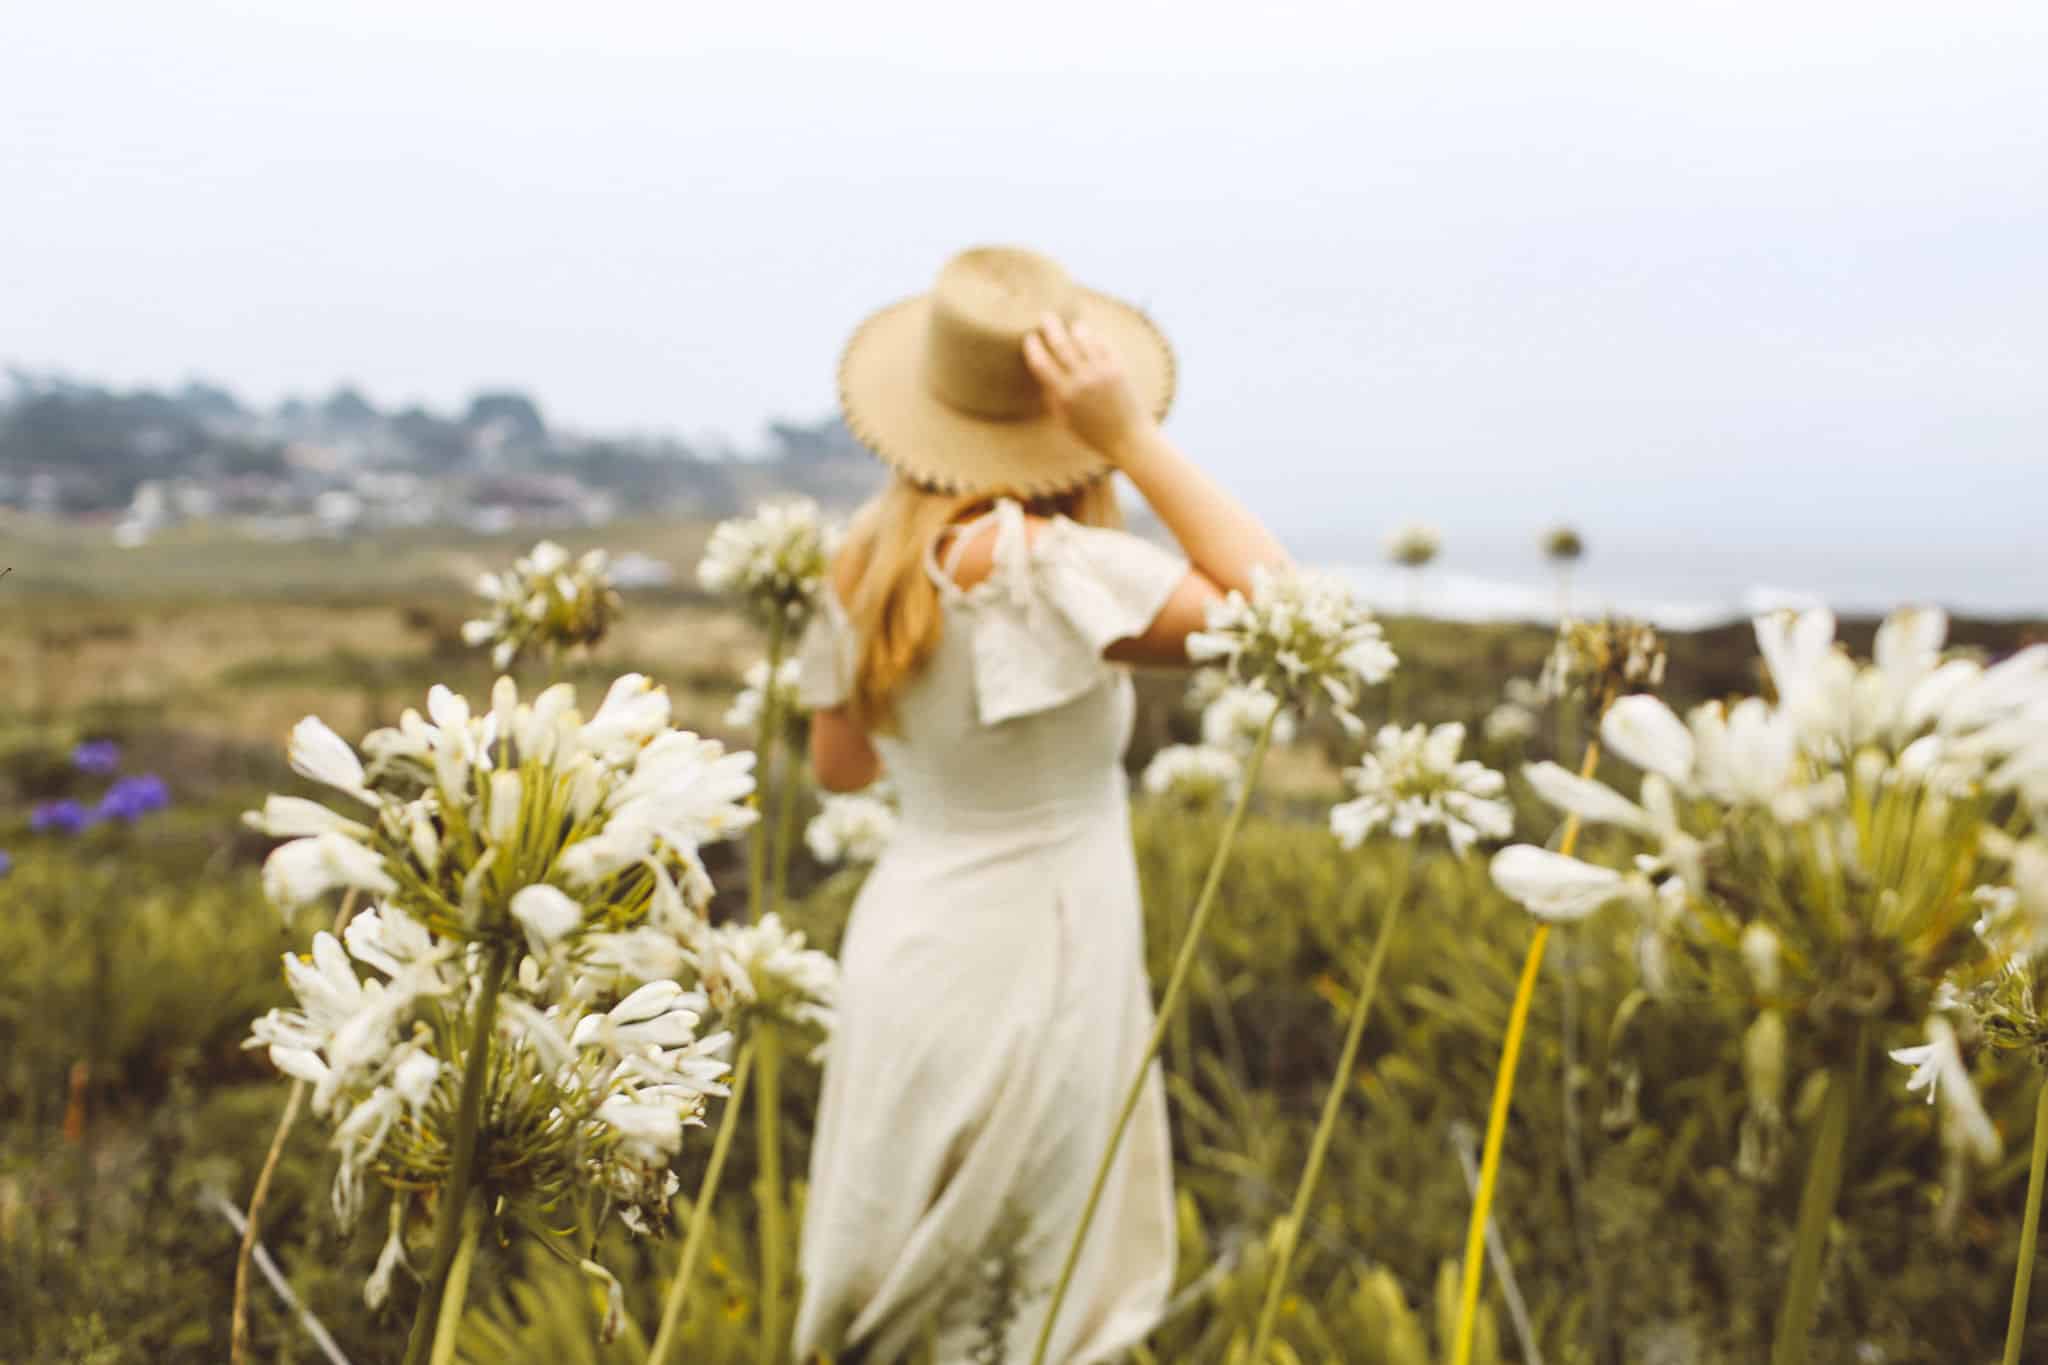 Woman in a dress and straw hat among the flowers